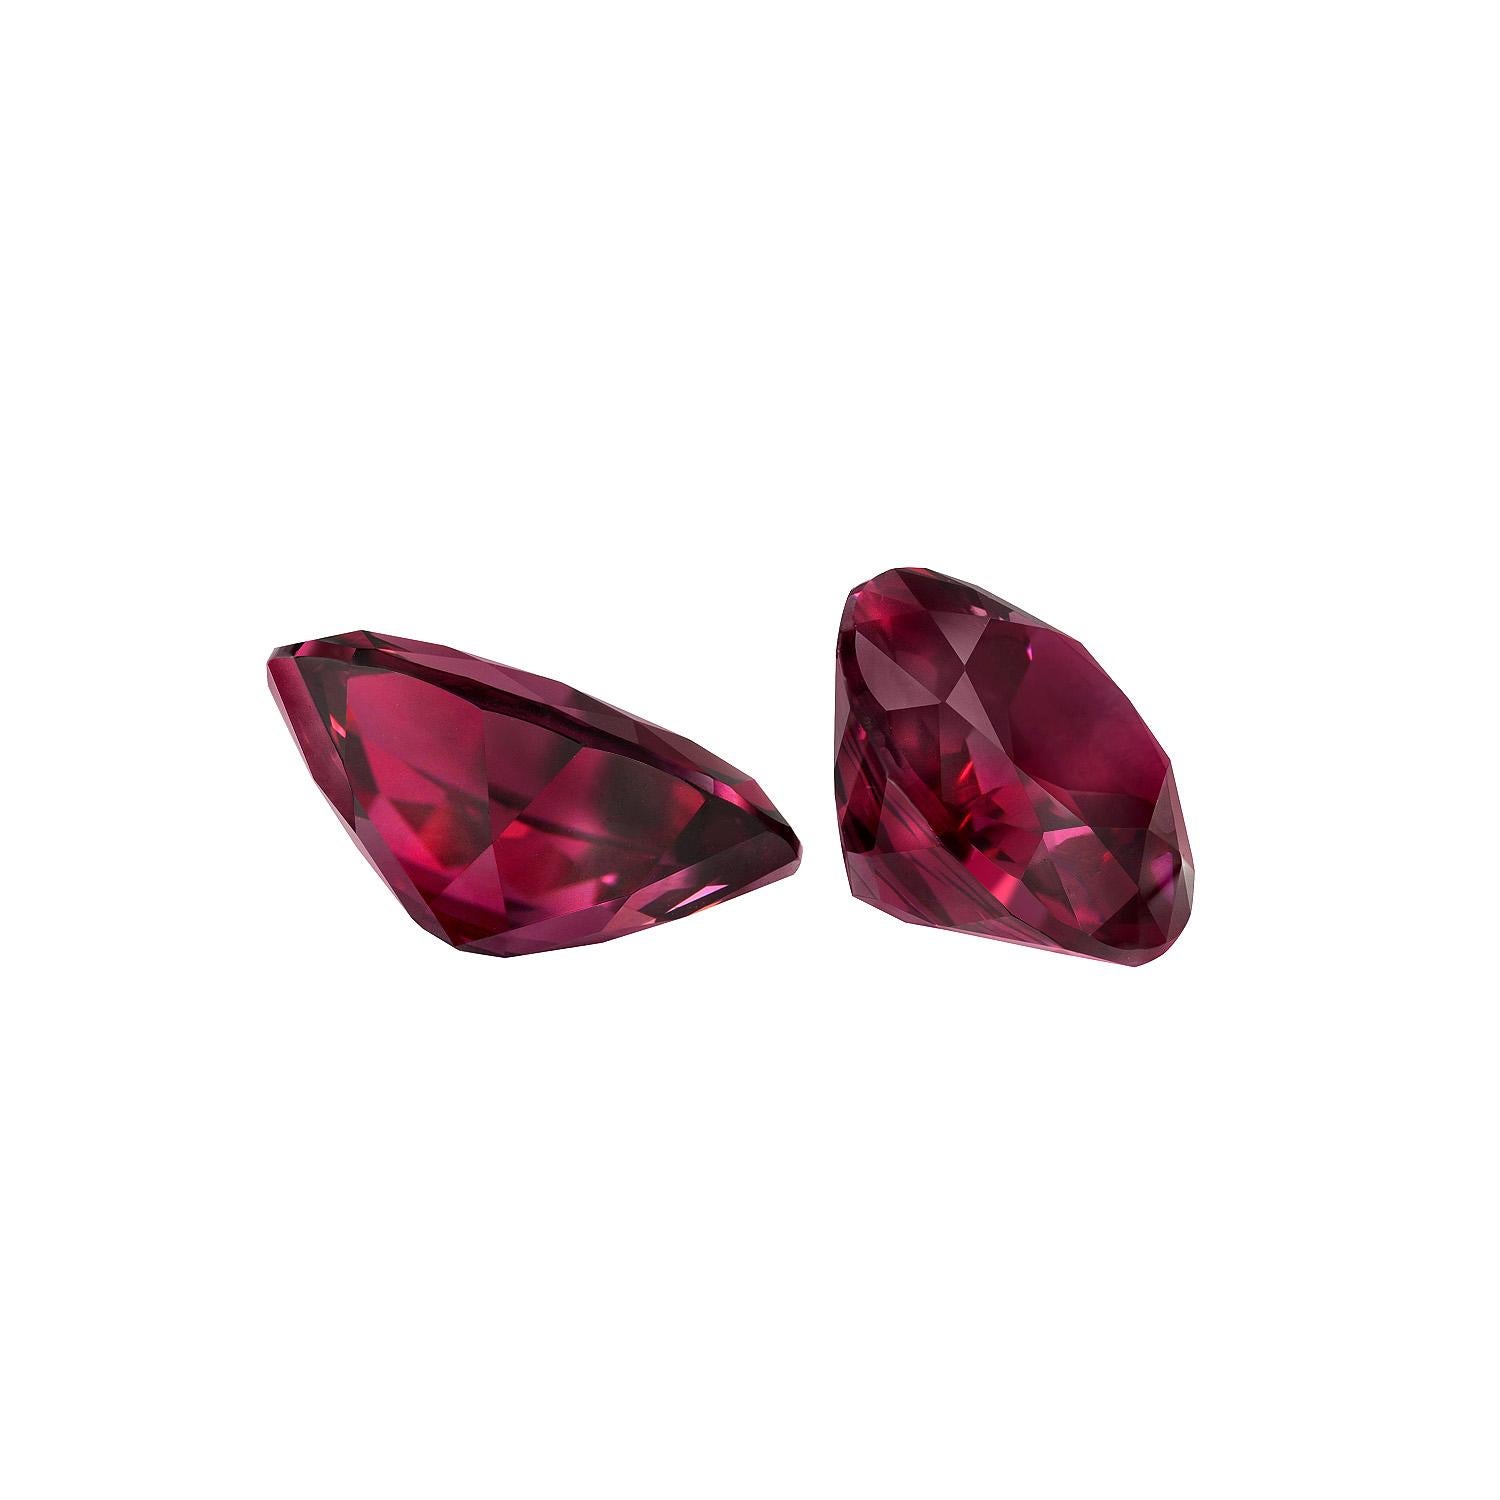 Striking pair of Rhodolite Garnet oval gems, weighing a total of 10.39 carats, offered loose for an impressive pair of earrings.
Returns are accepted and paid by us within 7 days of delivery.
We offer supreme custom jewelry work upon request. Please